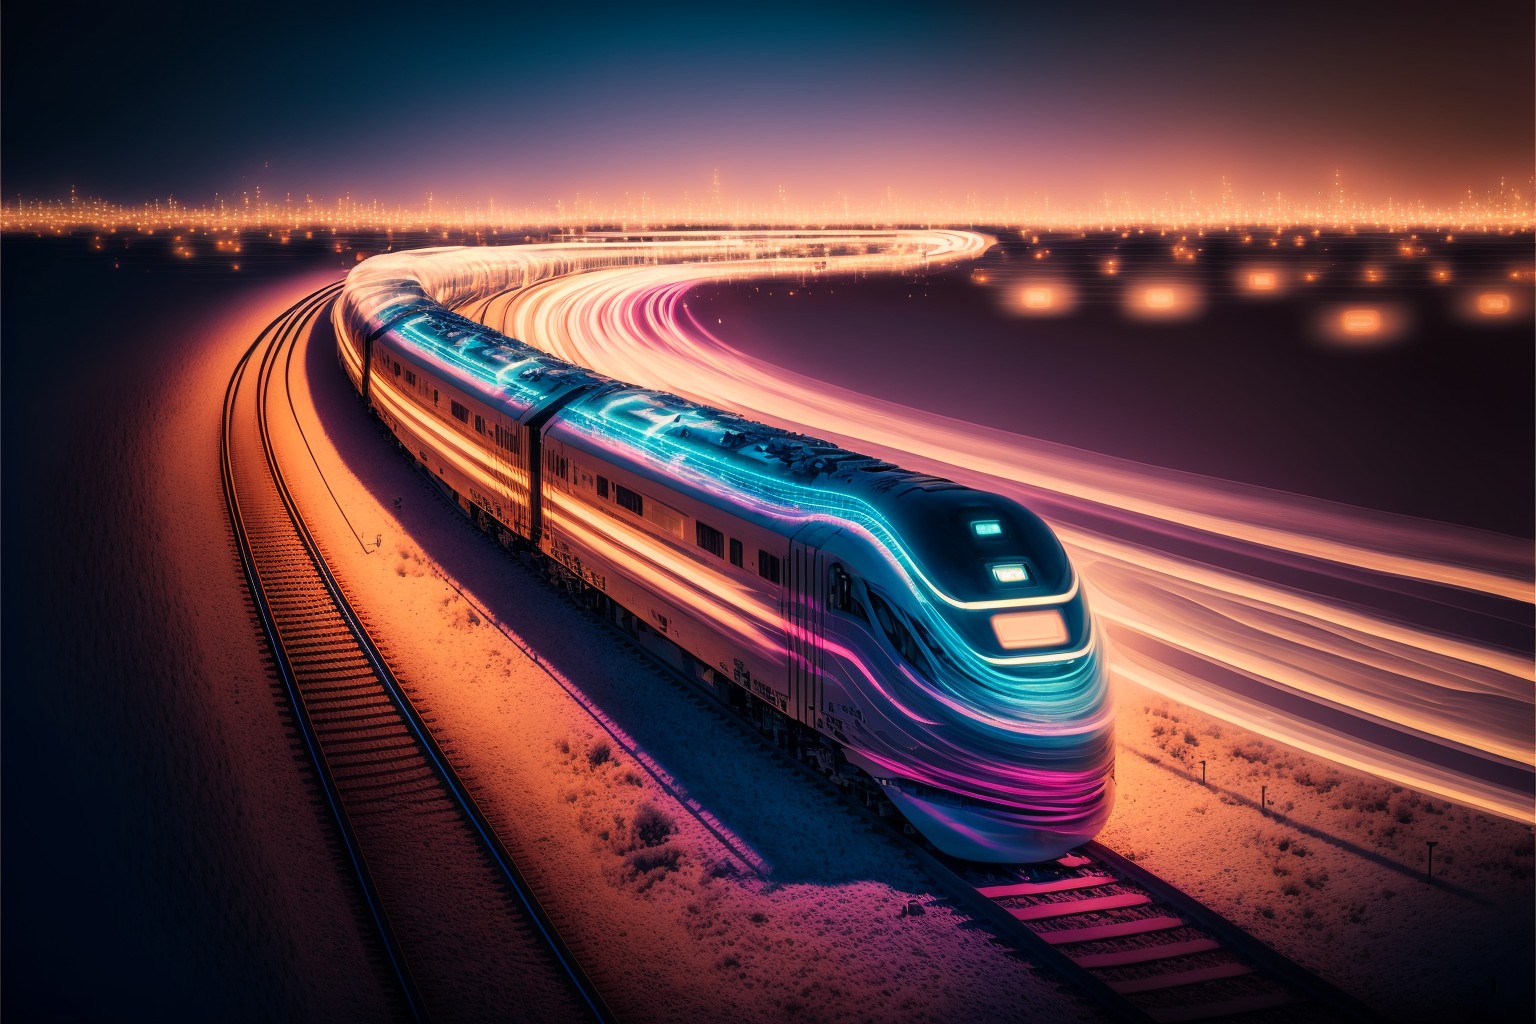 Time-lapse photography of speeding high-speed trains